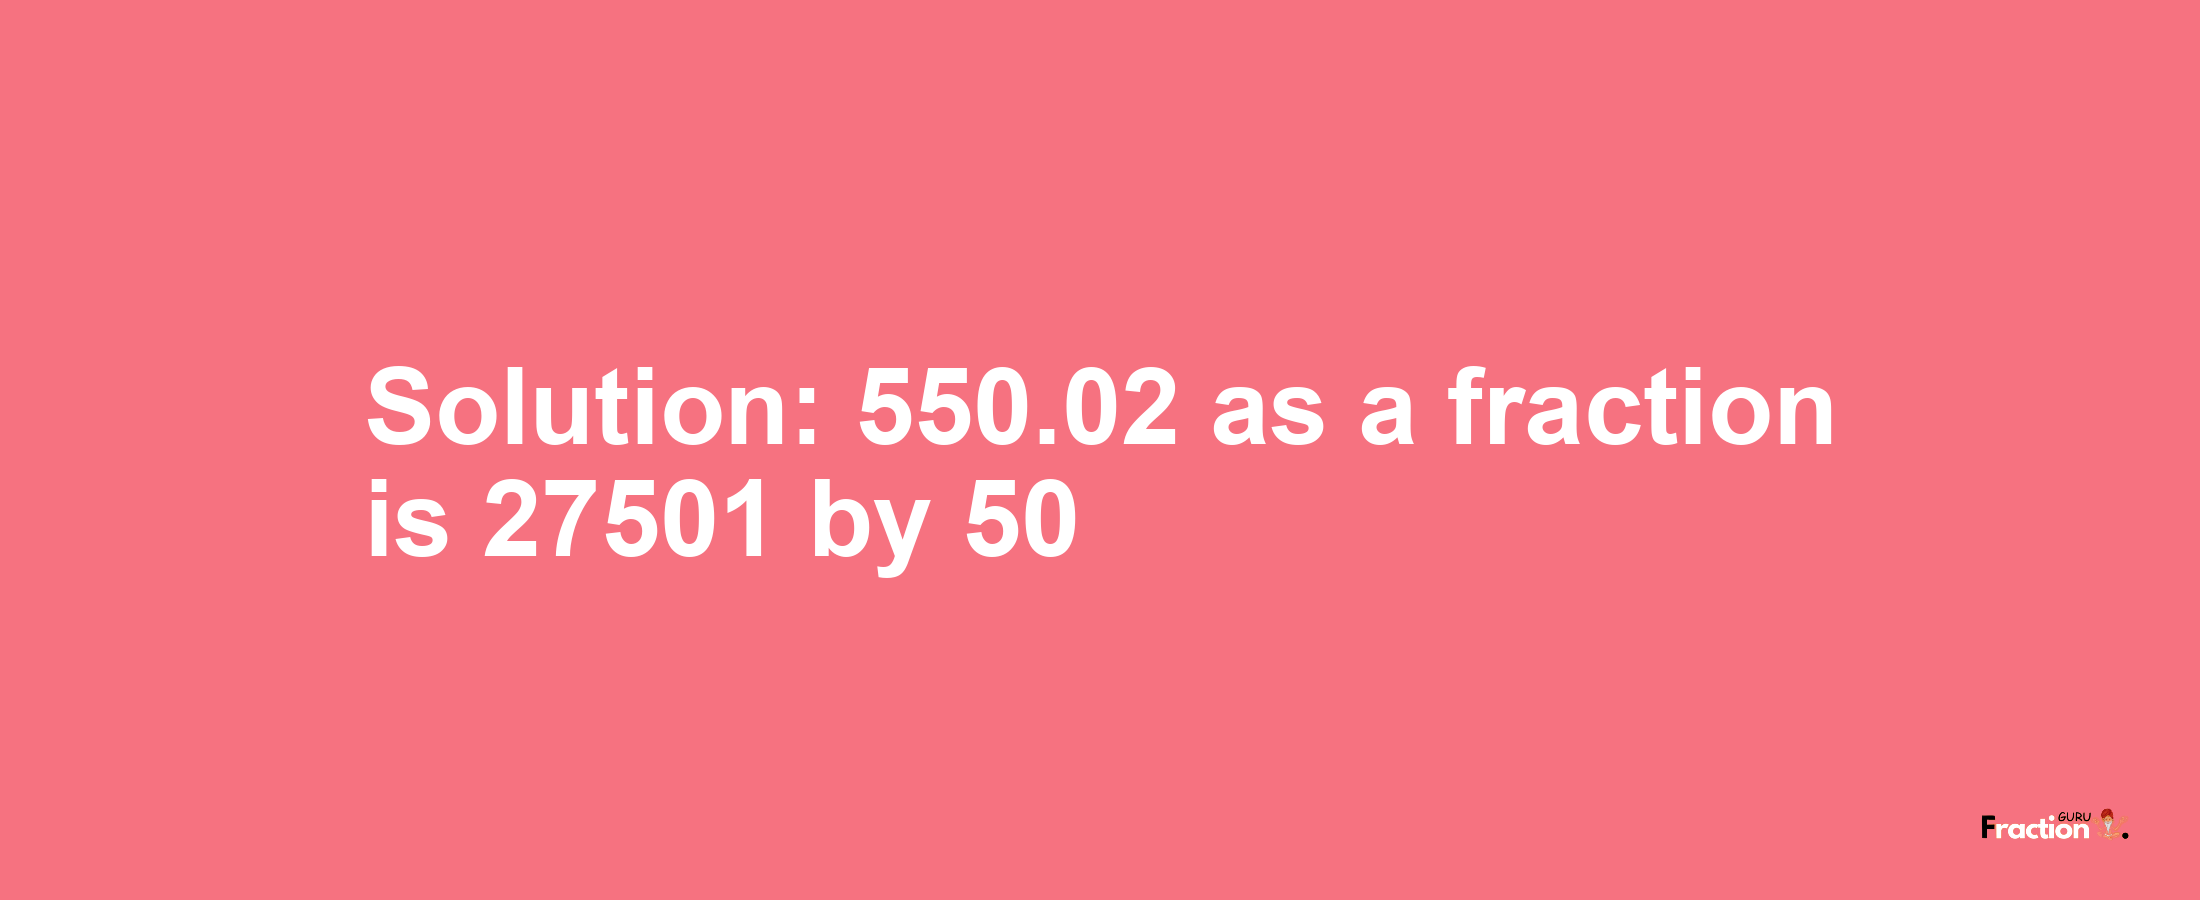 Solution:550.02 as a fraction is 27501/50